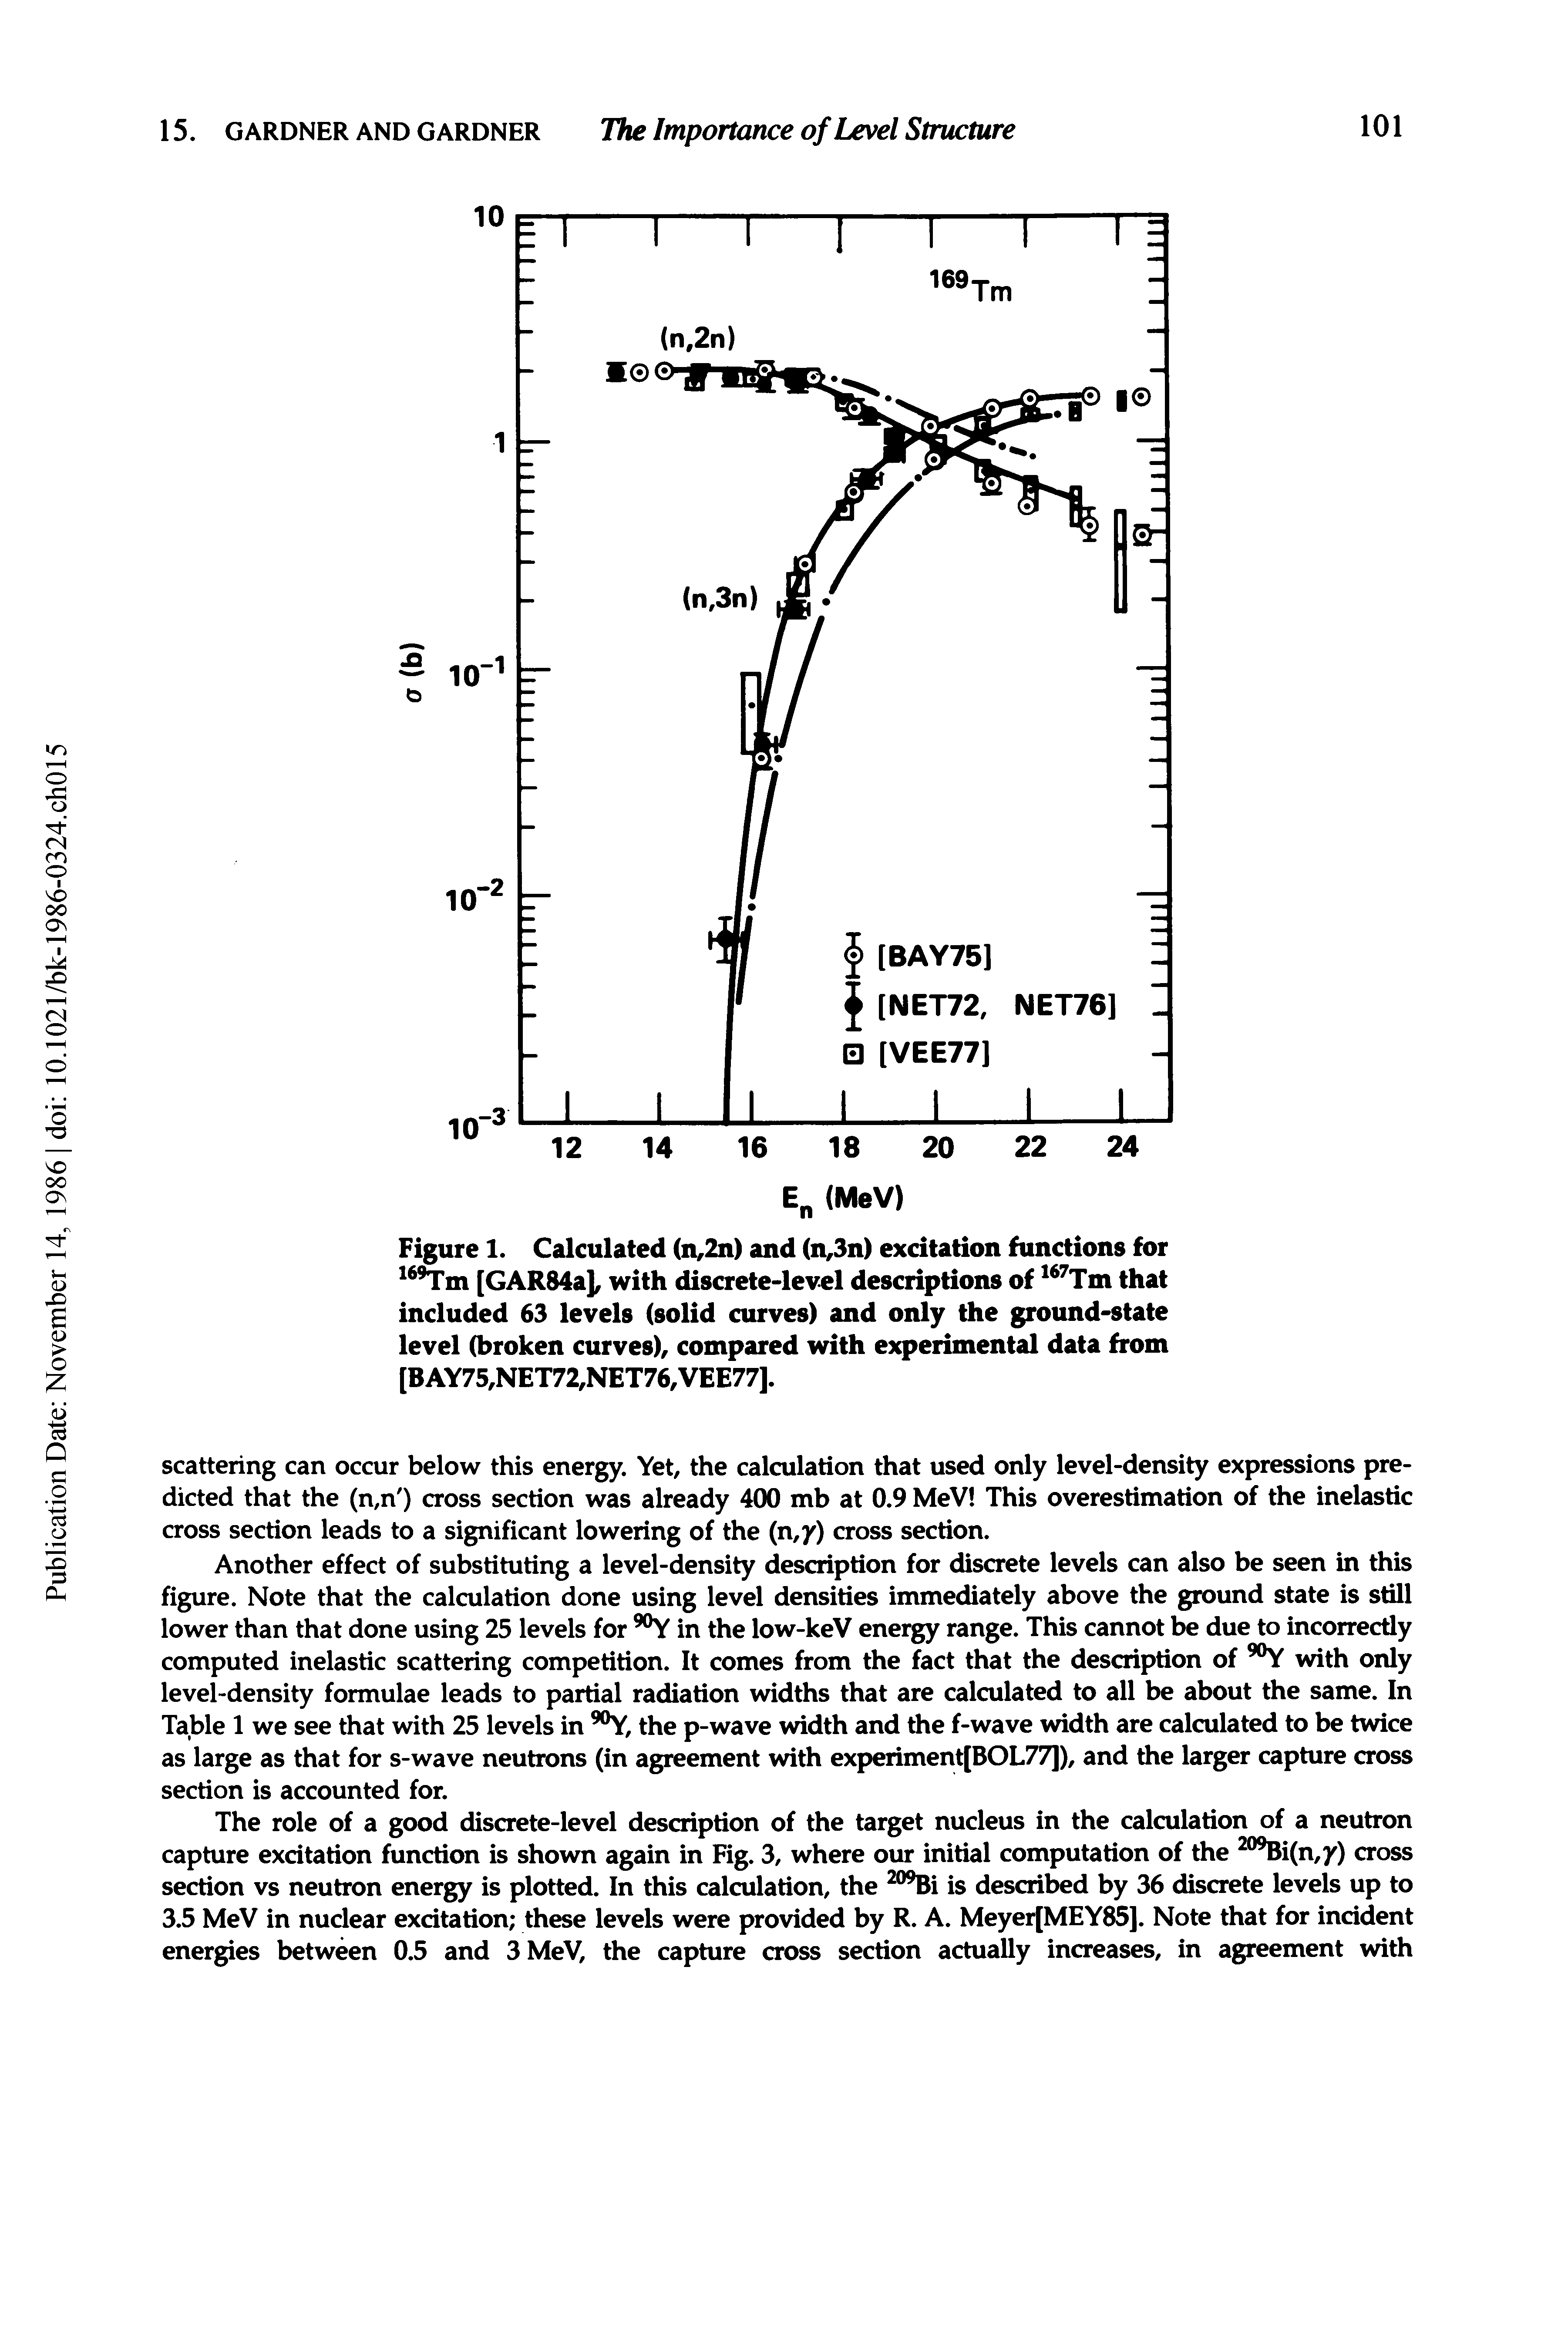 Figure 1. Calculated (n,2n) and (n,3n) excitation functions for 16 Tm [GAR84a), with discrete-level descriptions of 167Tm that included 63 levels (solid curves) and only the ground-state level (broken curves), compared with experimental data from [BAY75,NET72,NET76,VEE77].